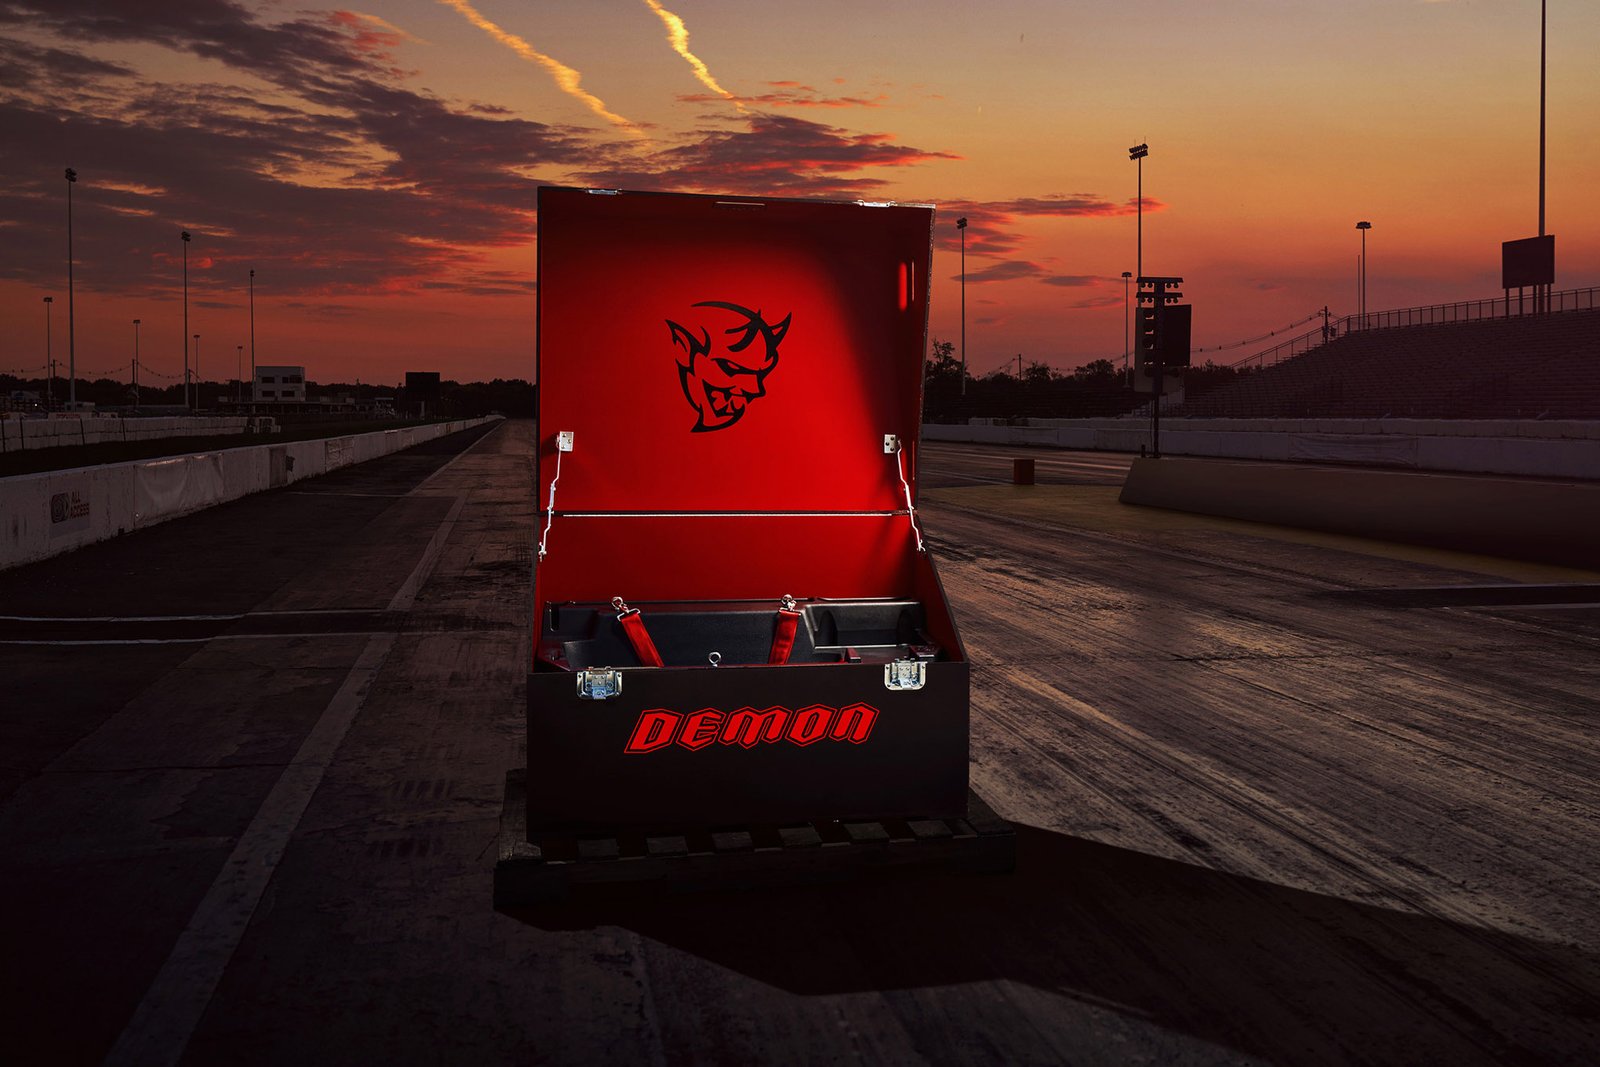 The Demon Crate holds 18 components that maximize the 2018 Dodge